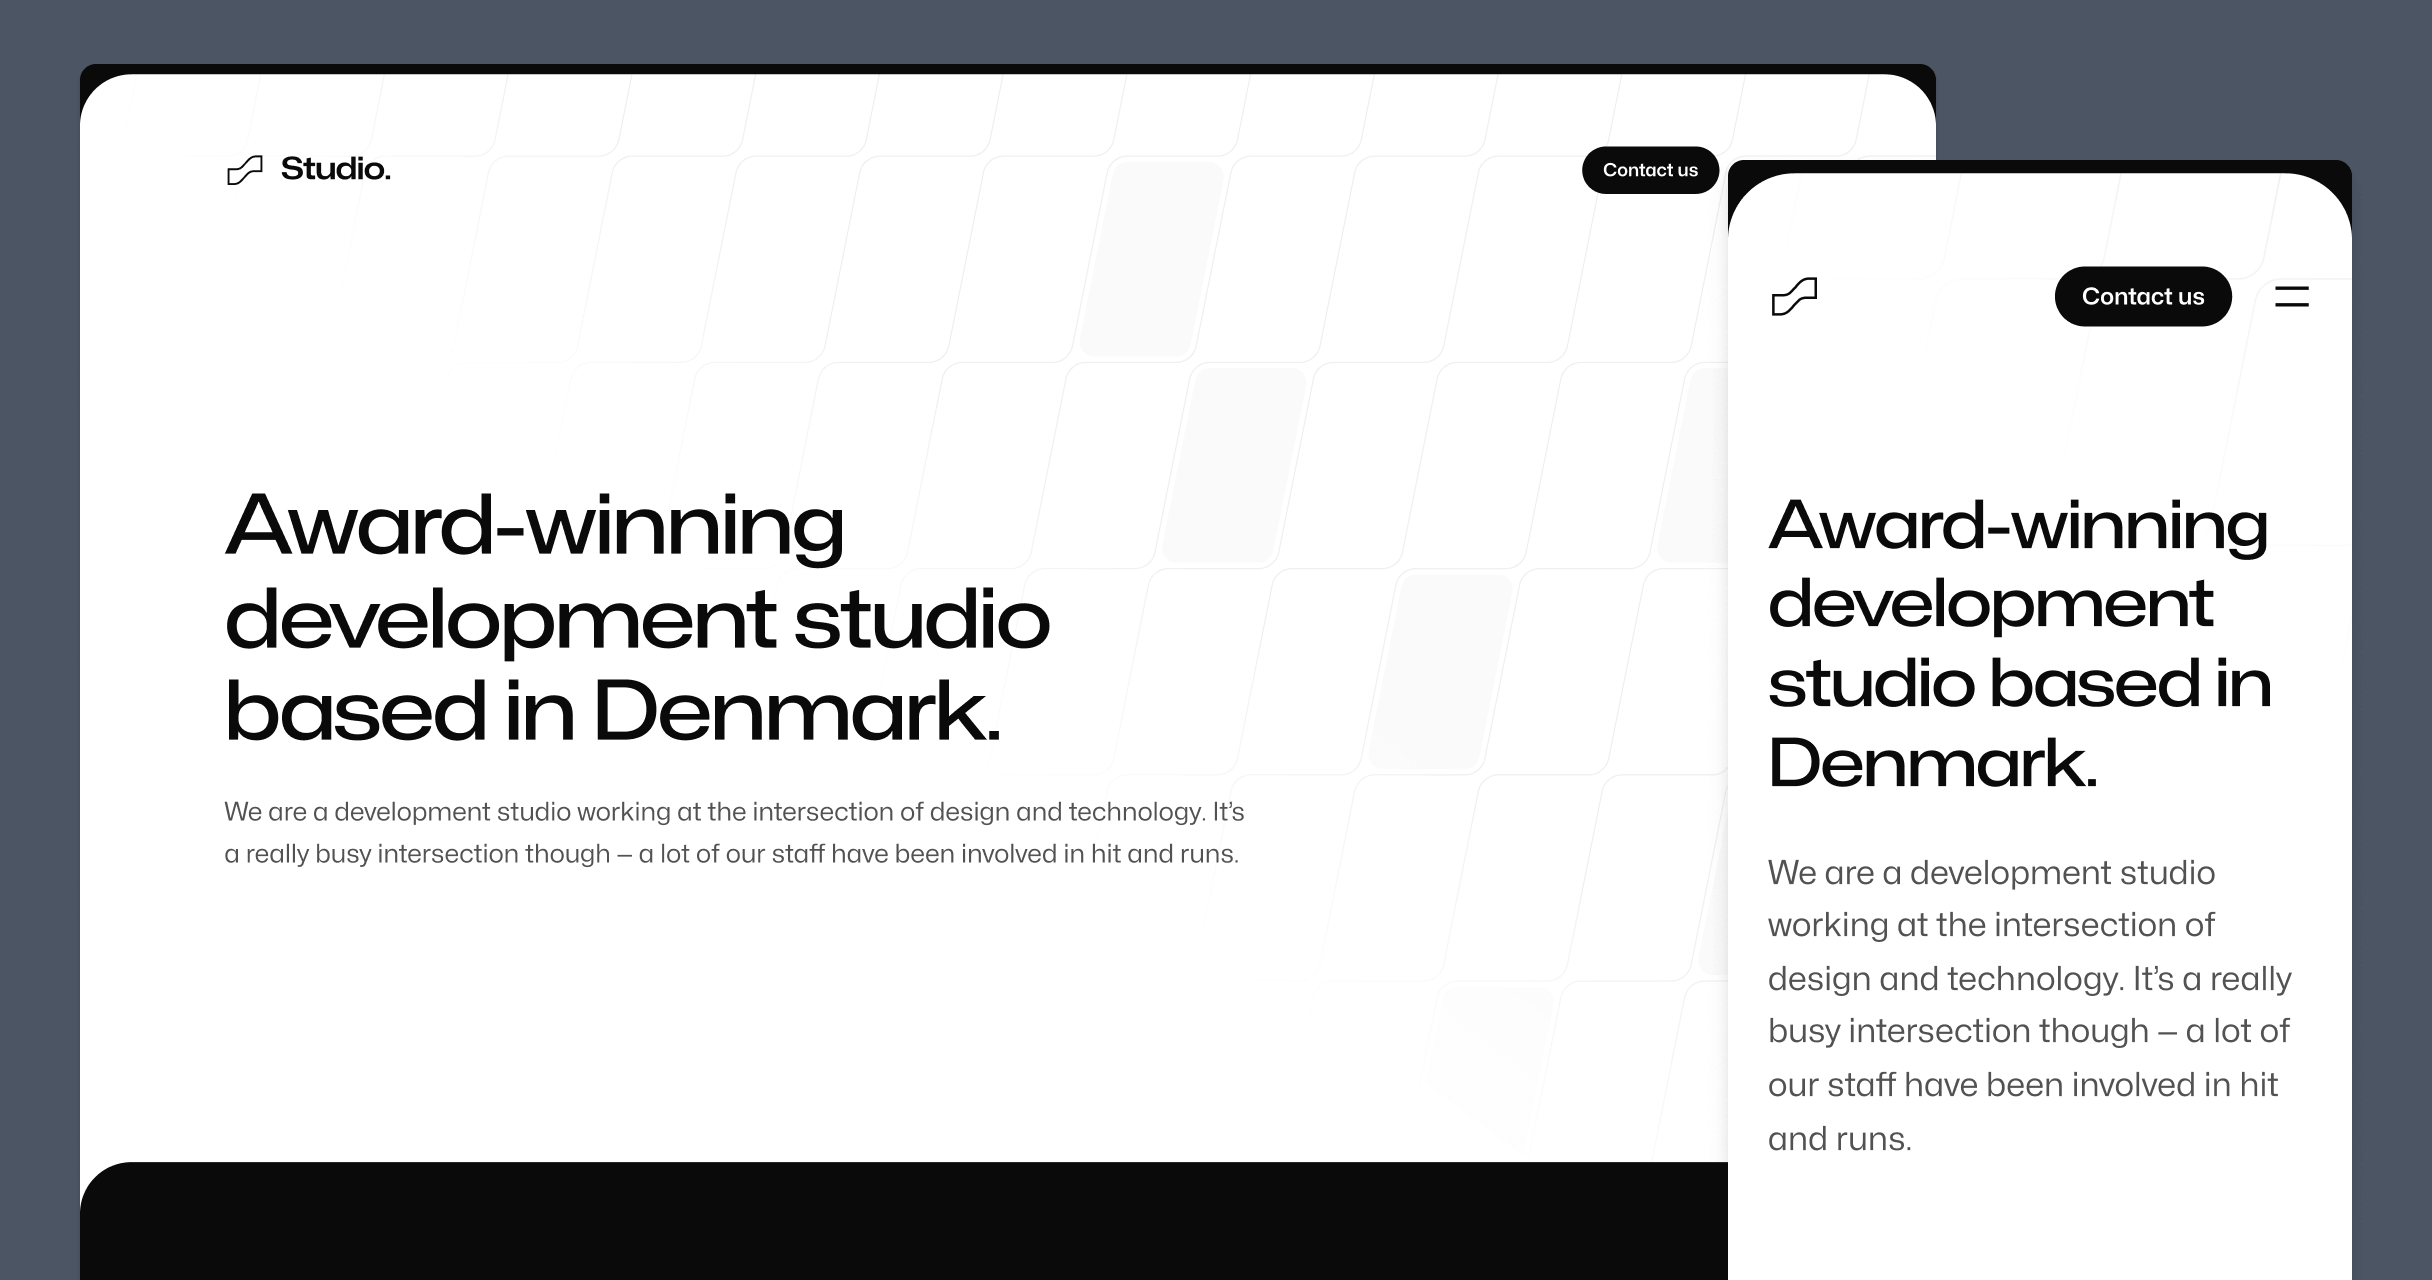 The new Studio agency template